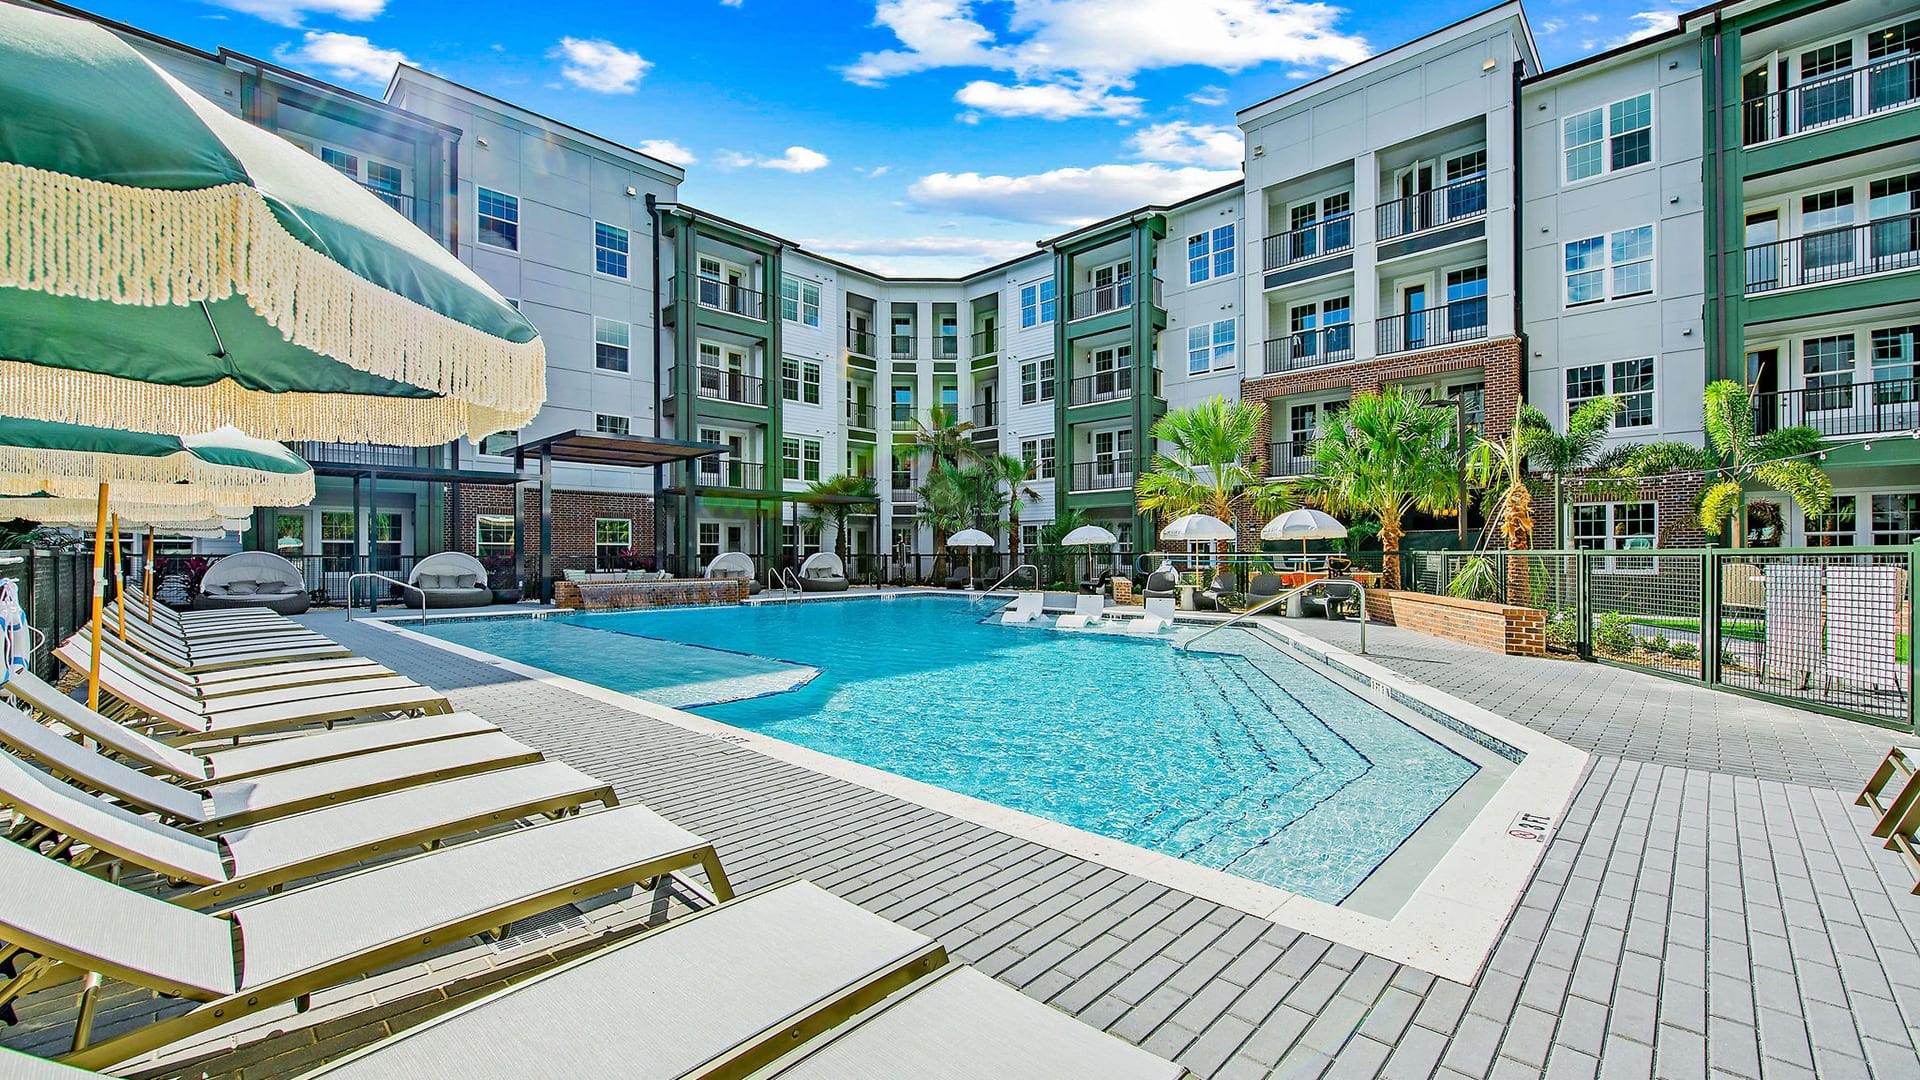 Resort-Style Swimming Pool With Cabanas at Apartments Near Tampa, FL